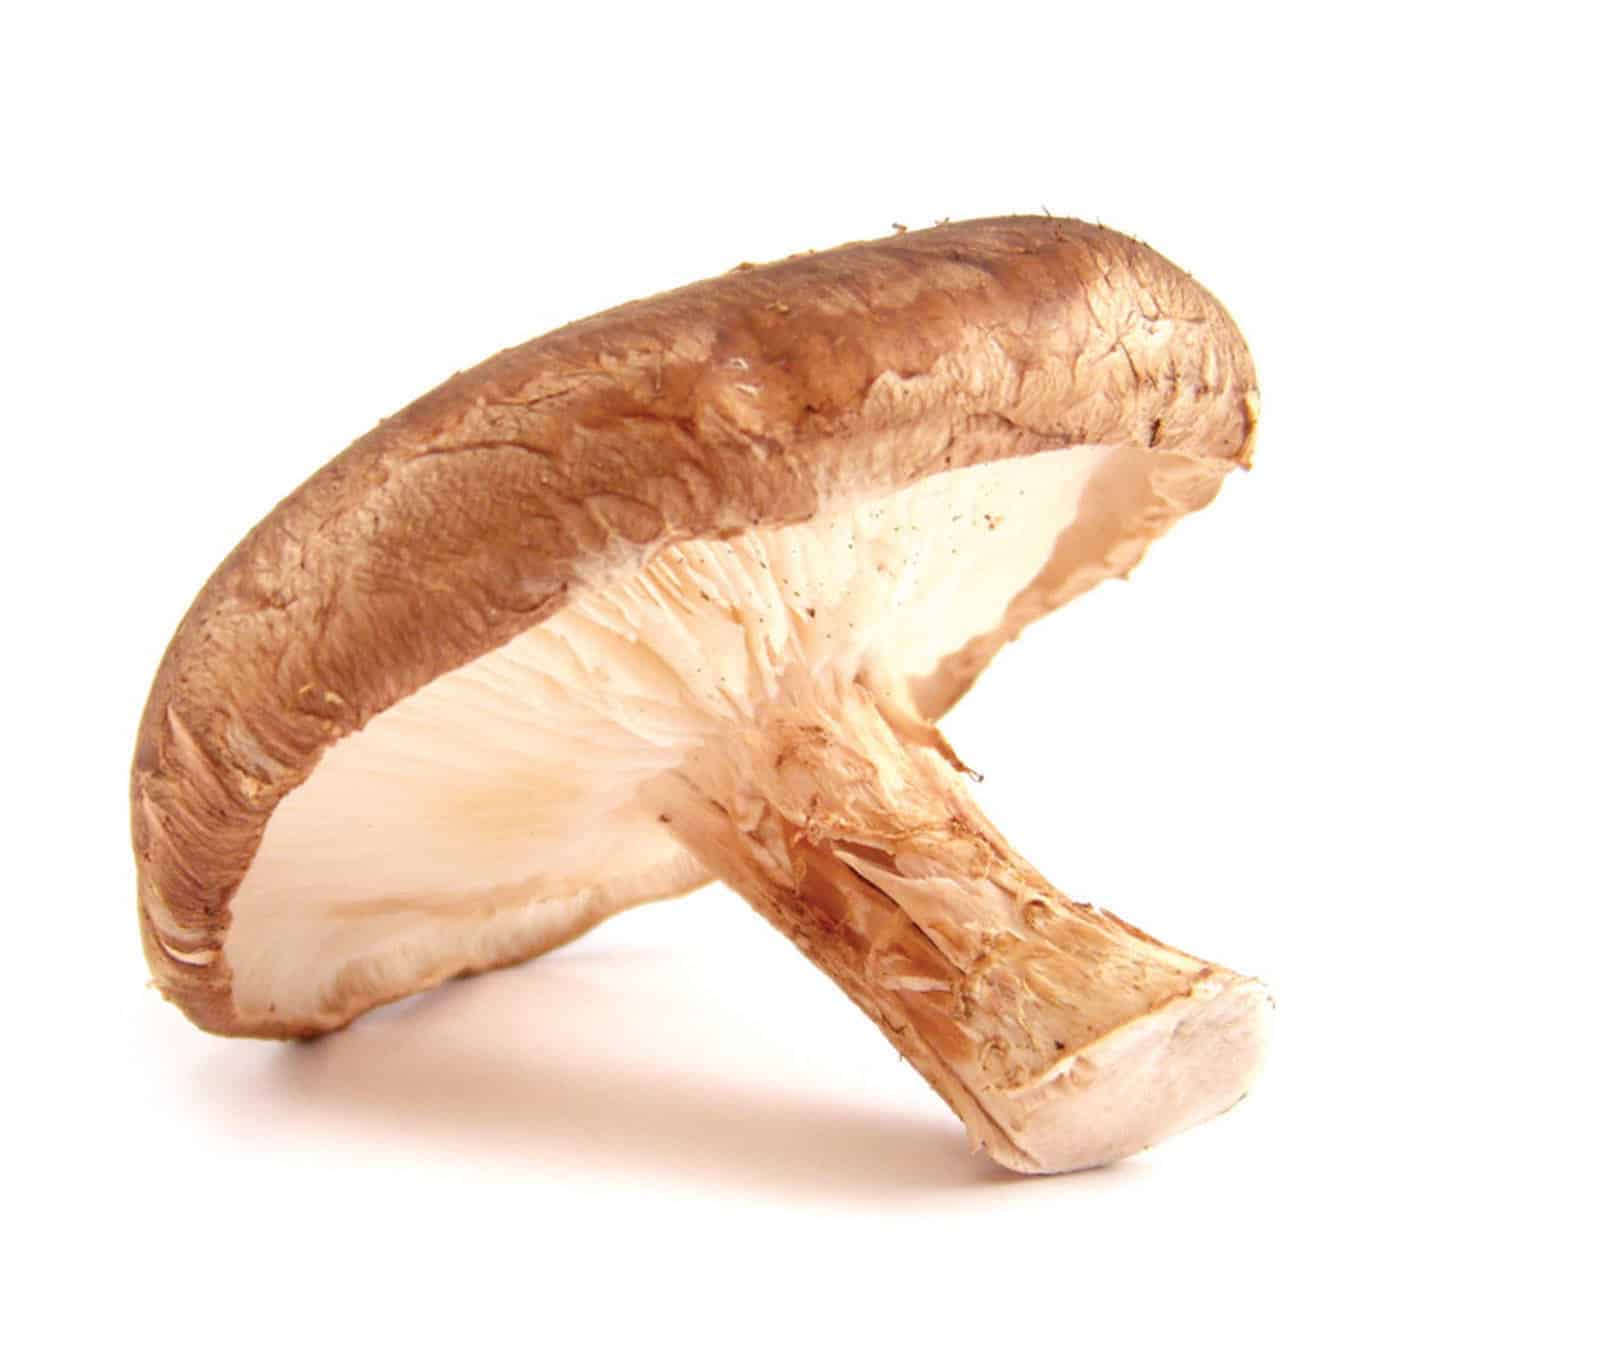 Mushrooms And Breast Cancer